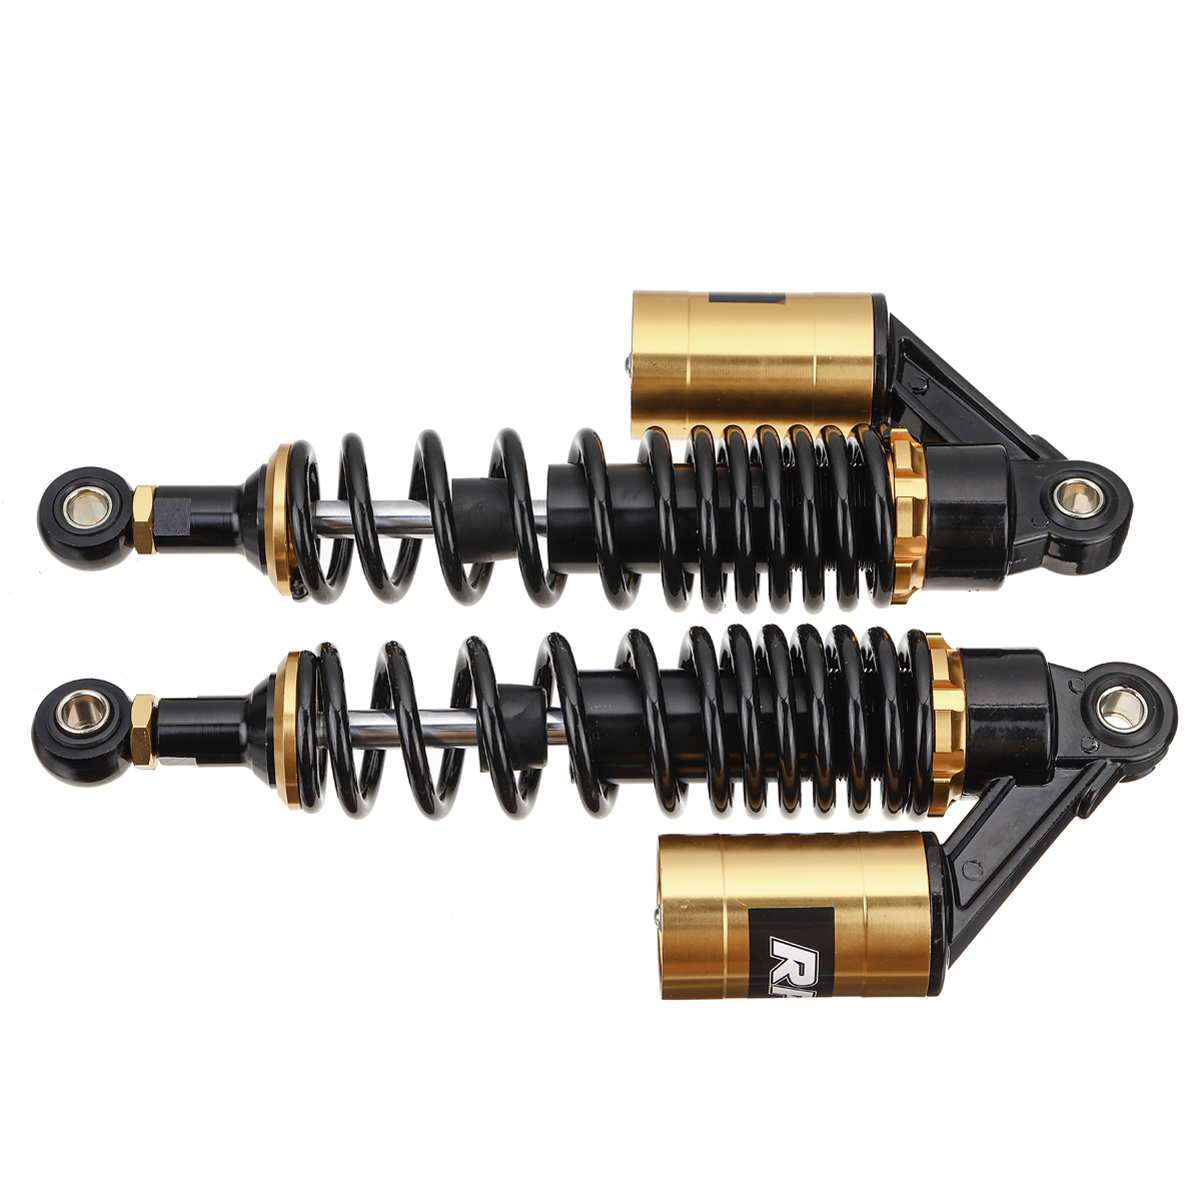 320Mm 12.5" Motorcycle Rear Shock Absorbers Suspension for Honda for Yamaha for Suzuki